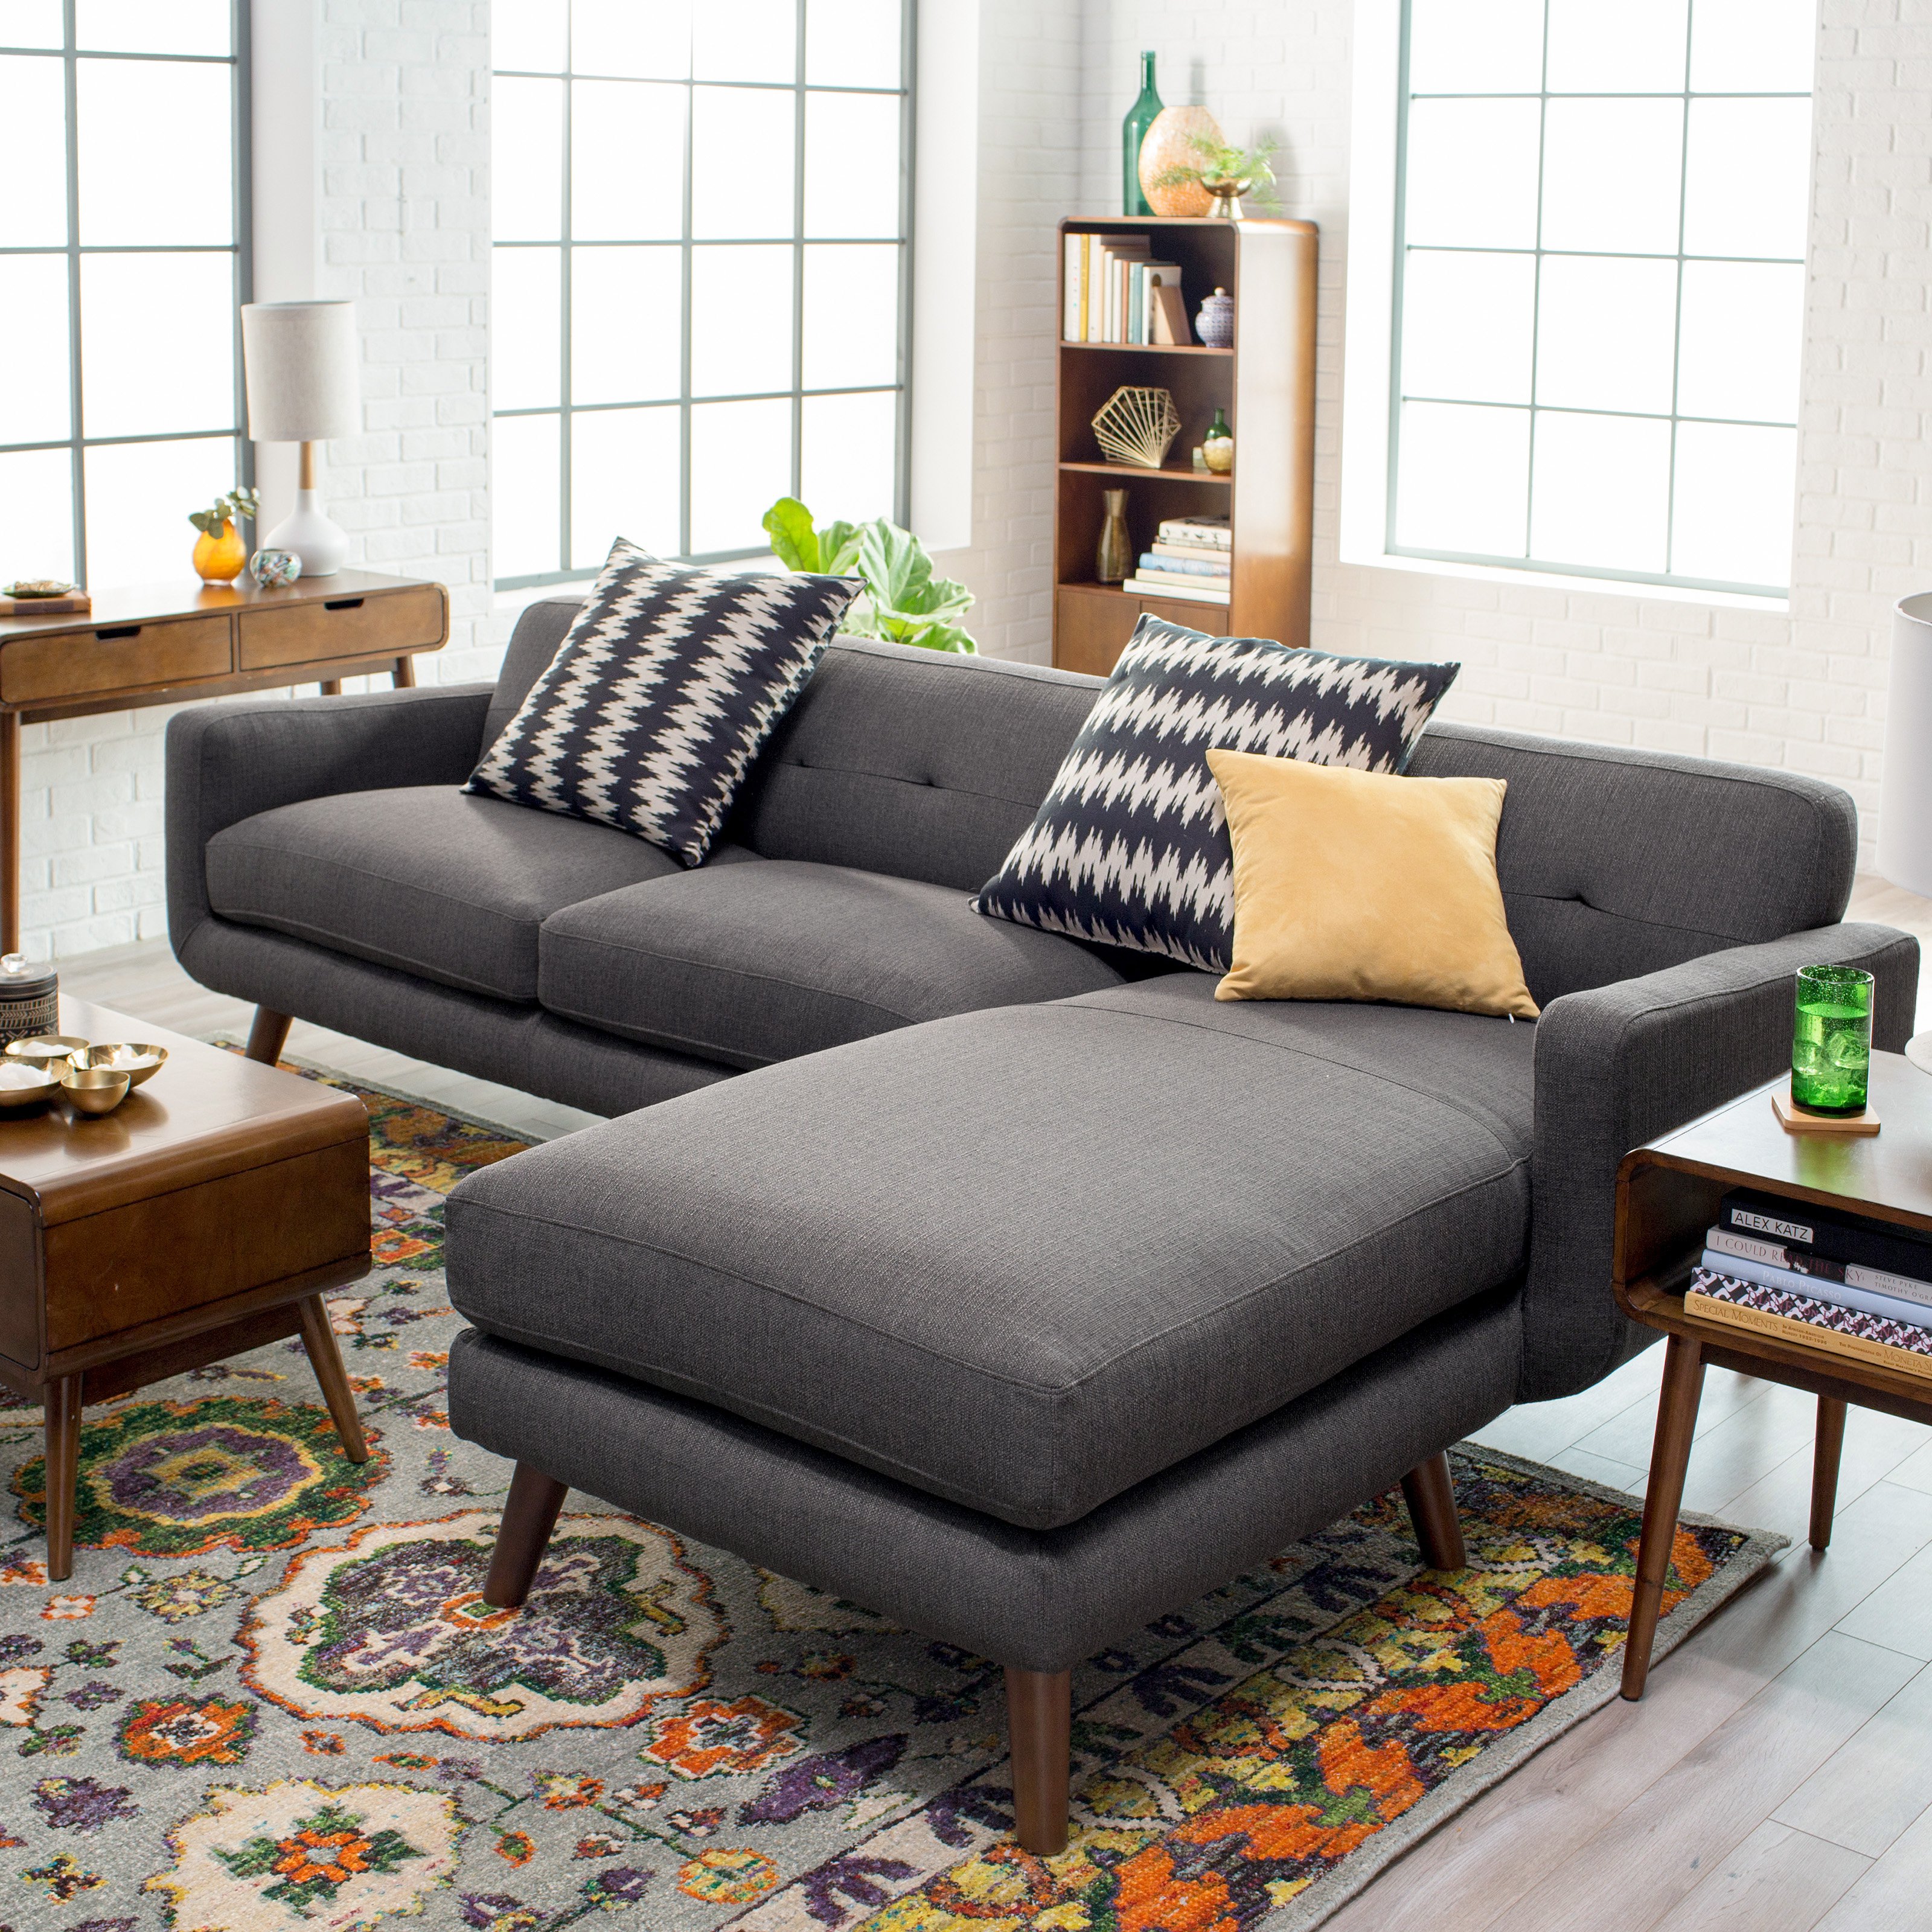 Belham Living Carter sofa section 2-part section with 2 accent cushions |  Hayneedle VBFPLIG